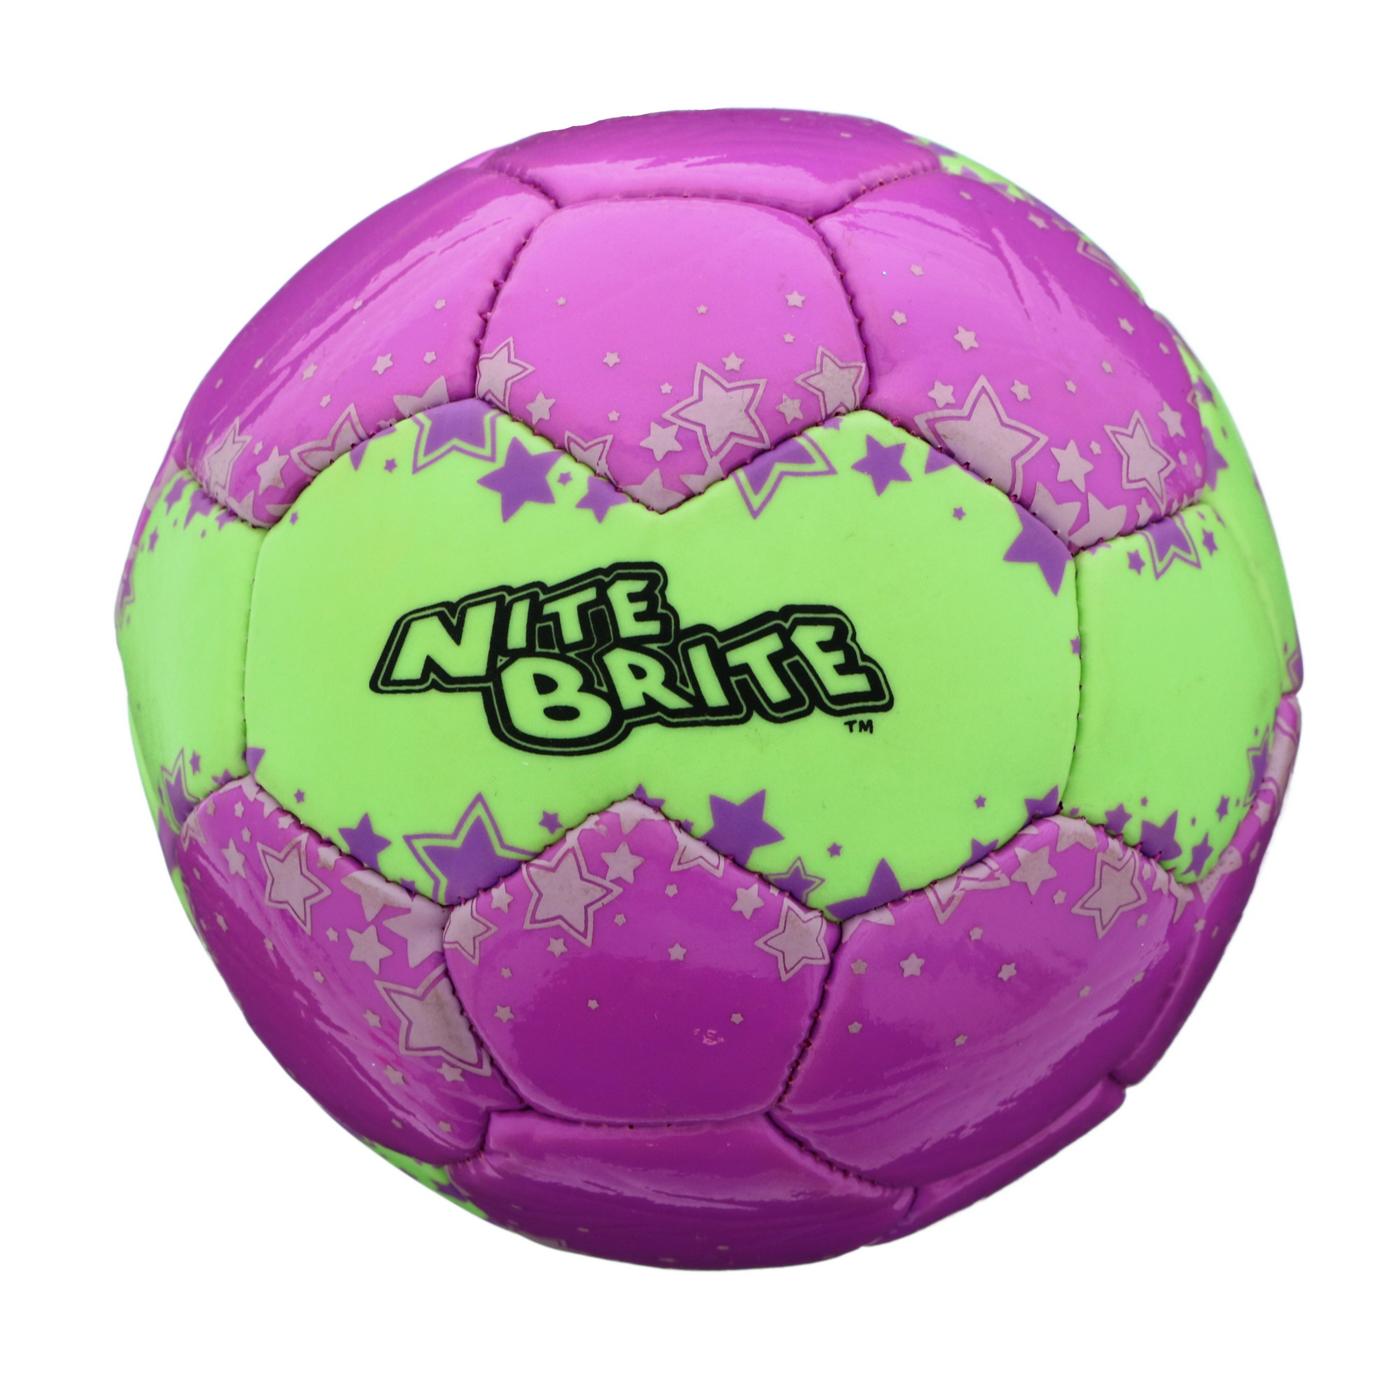 Baden Mini Nite Brite Soccer Ball, Assorted Colors; image 2 of 2